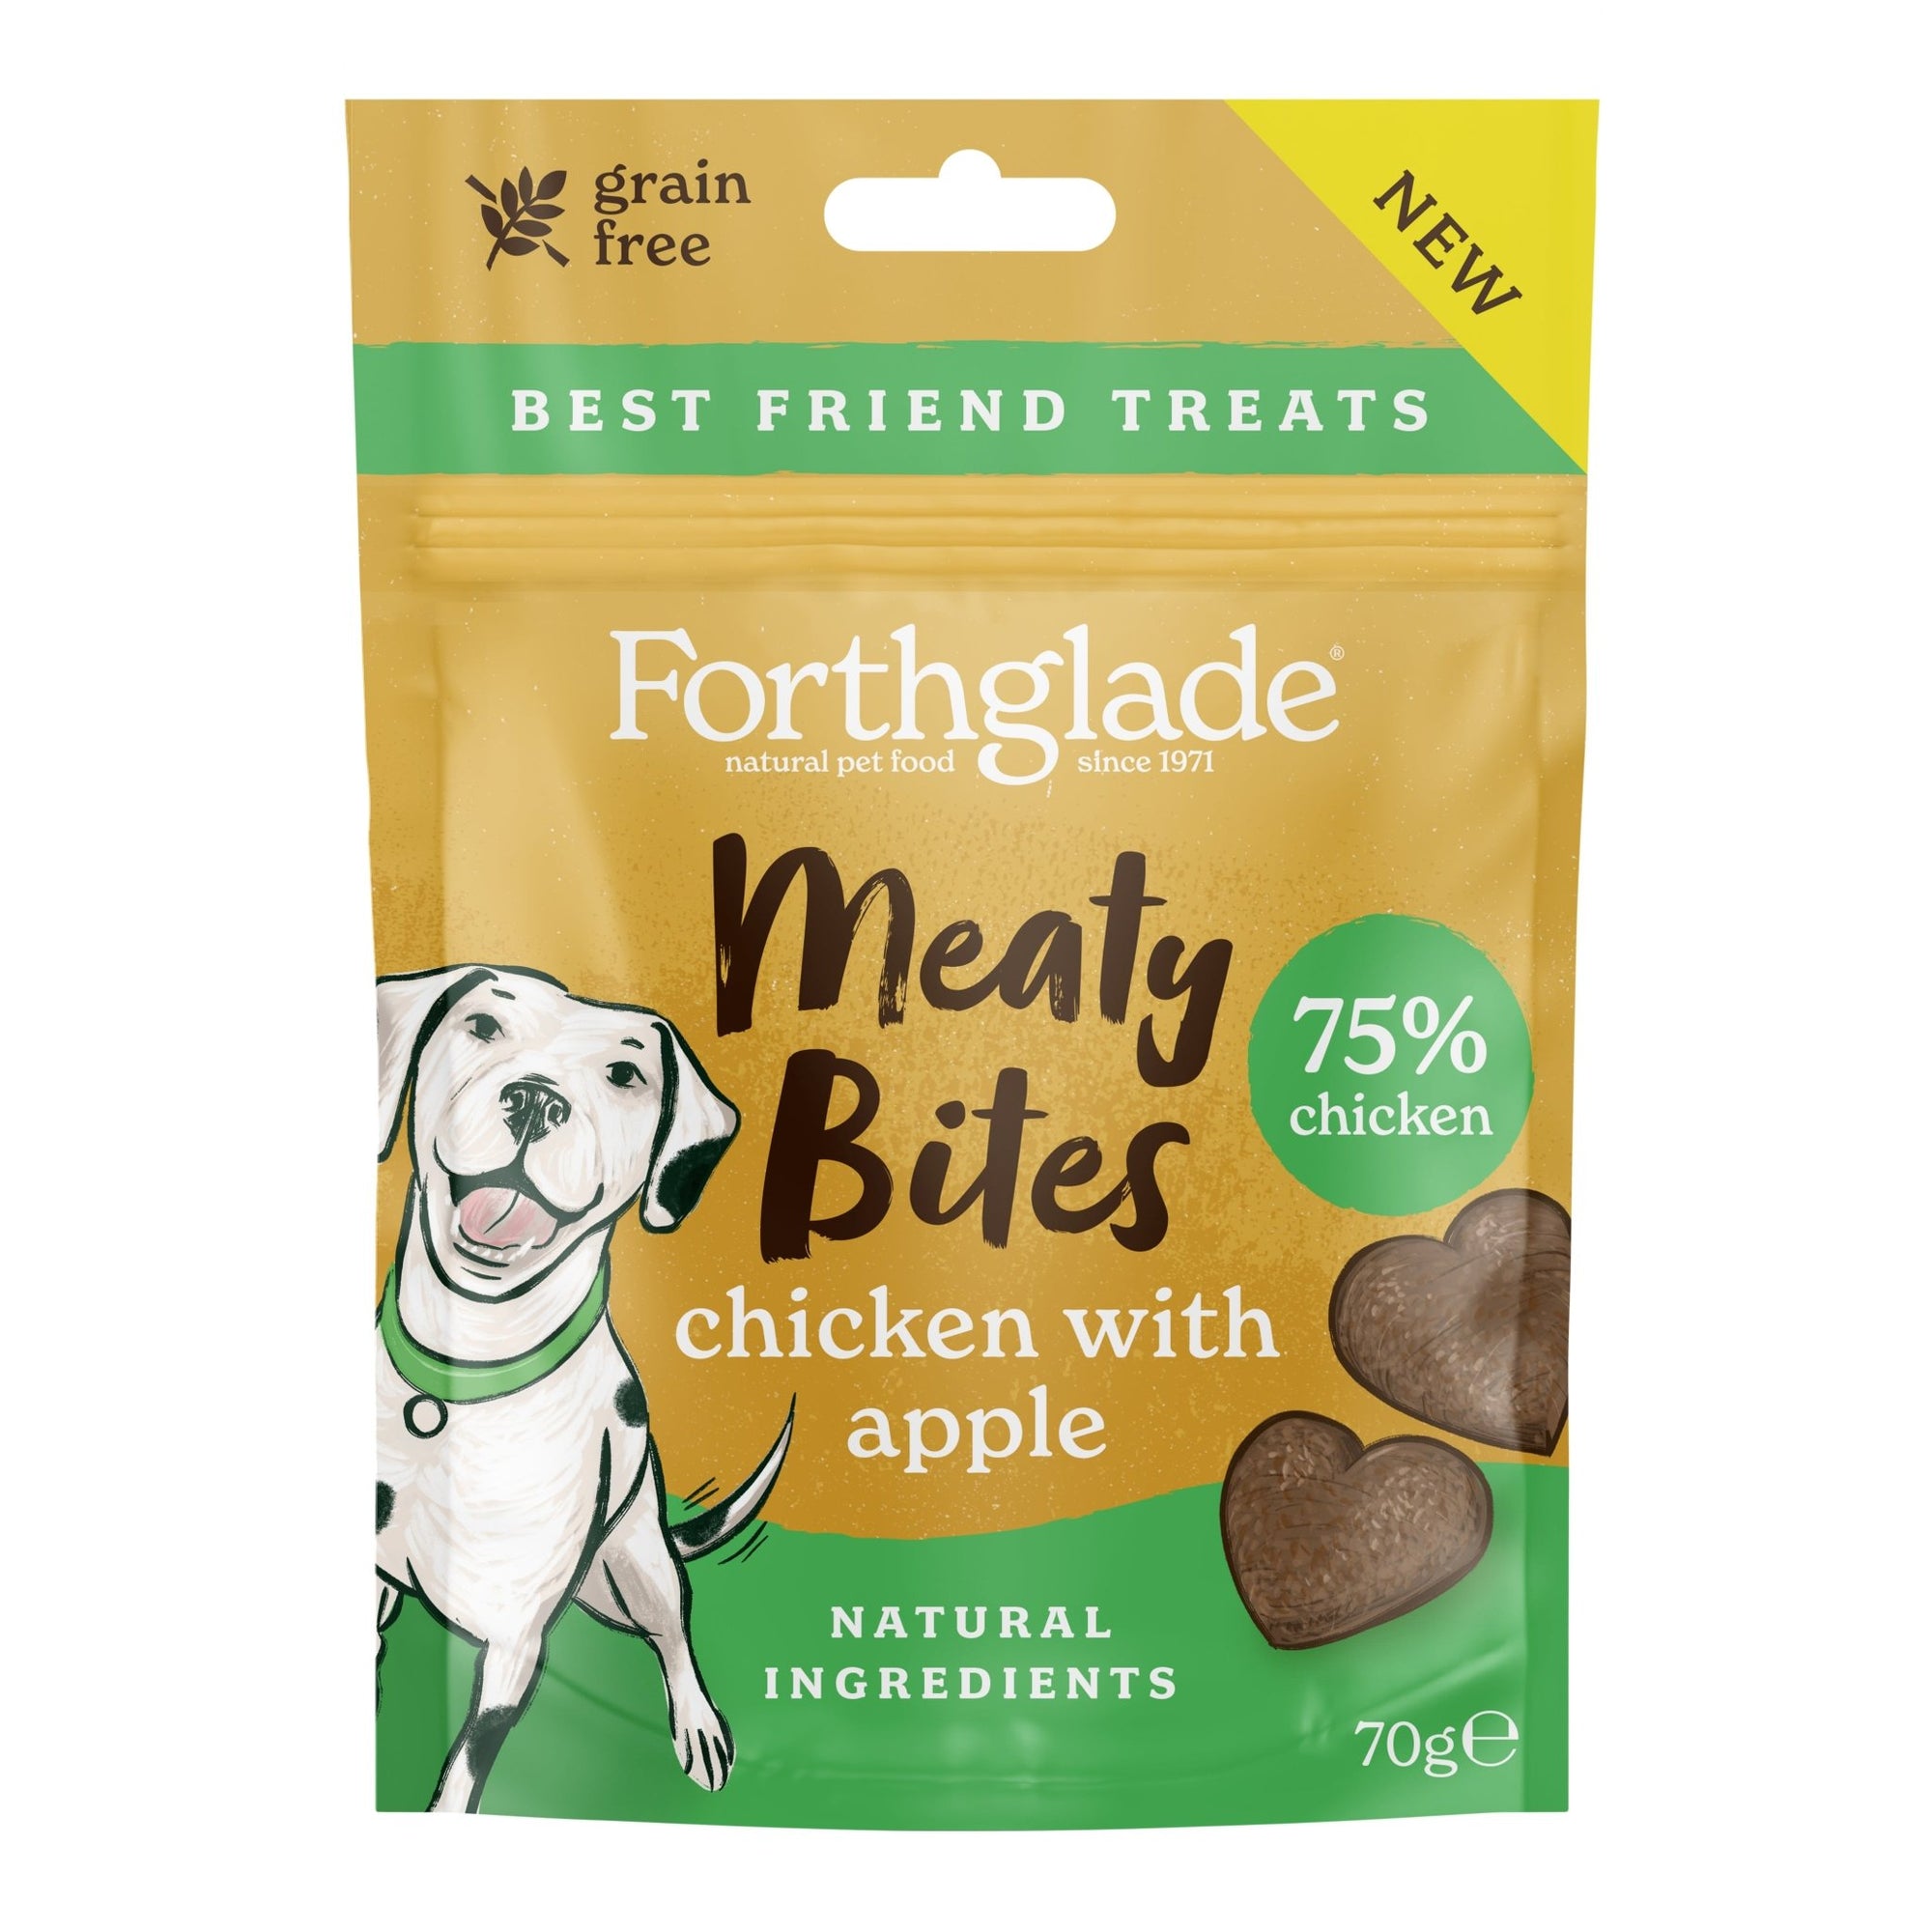 Forthglade Meaty Bites Grain Free Chicken with Apple Treats 10x70g, Forthglade,